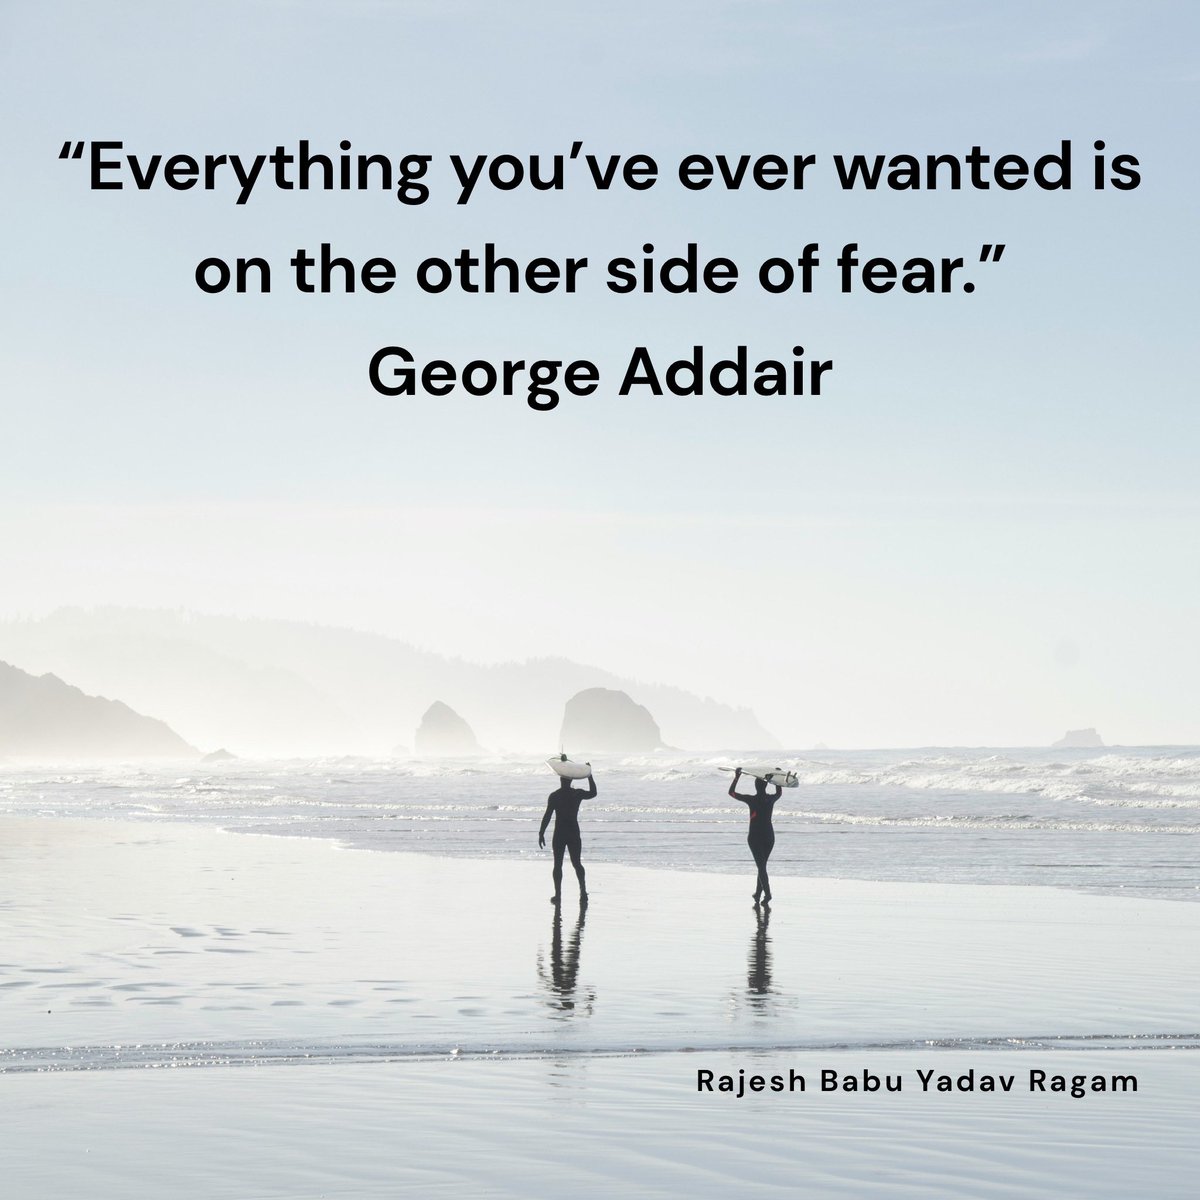 “Everything you’ve ever wanted is on the other side of fear.” #GeorgeAddair Rajesh Babu Yadav Ragam Rajesh Babu Yadav Ragam @followers #RajeshBabuYadavRagam #RajeshRagam @RajeshBabuYadav